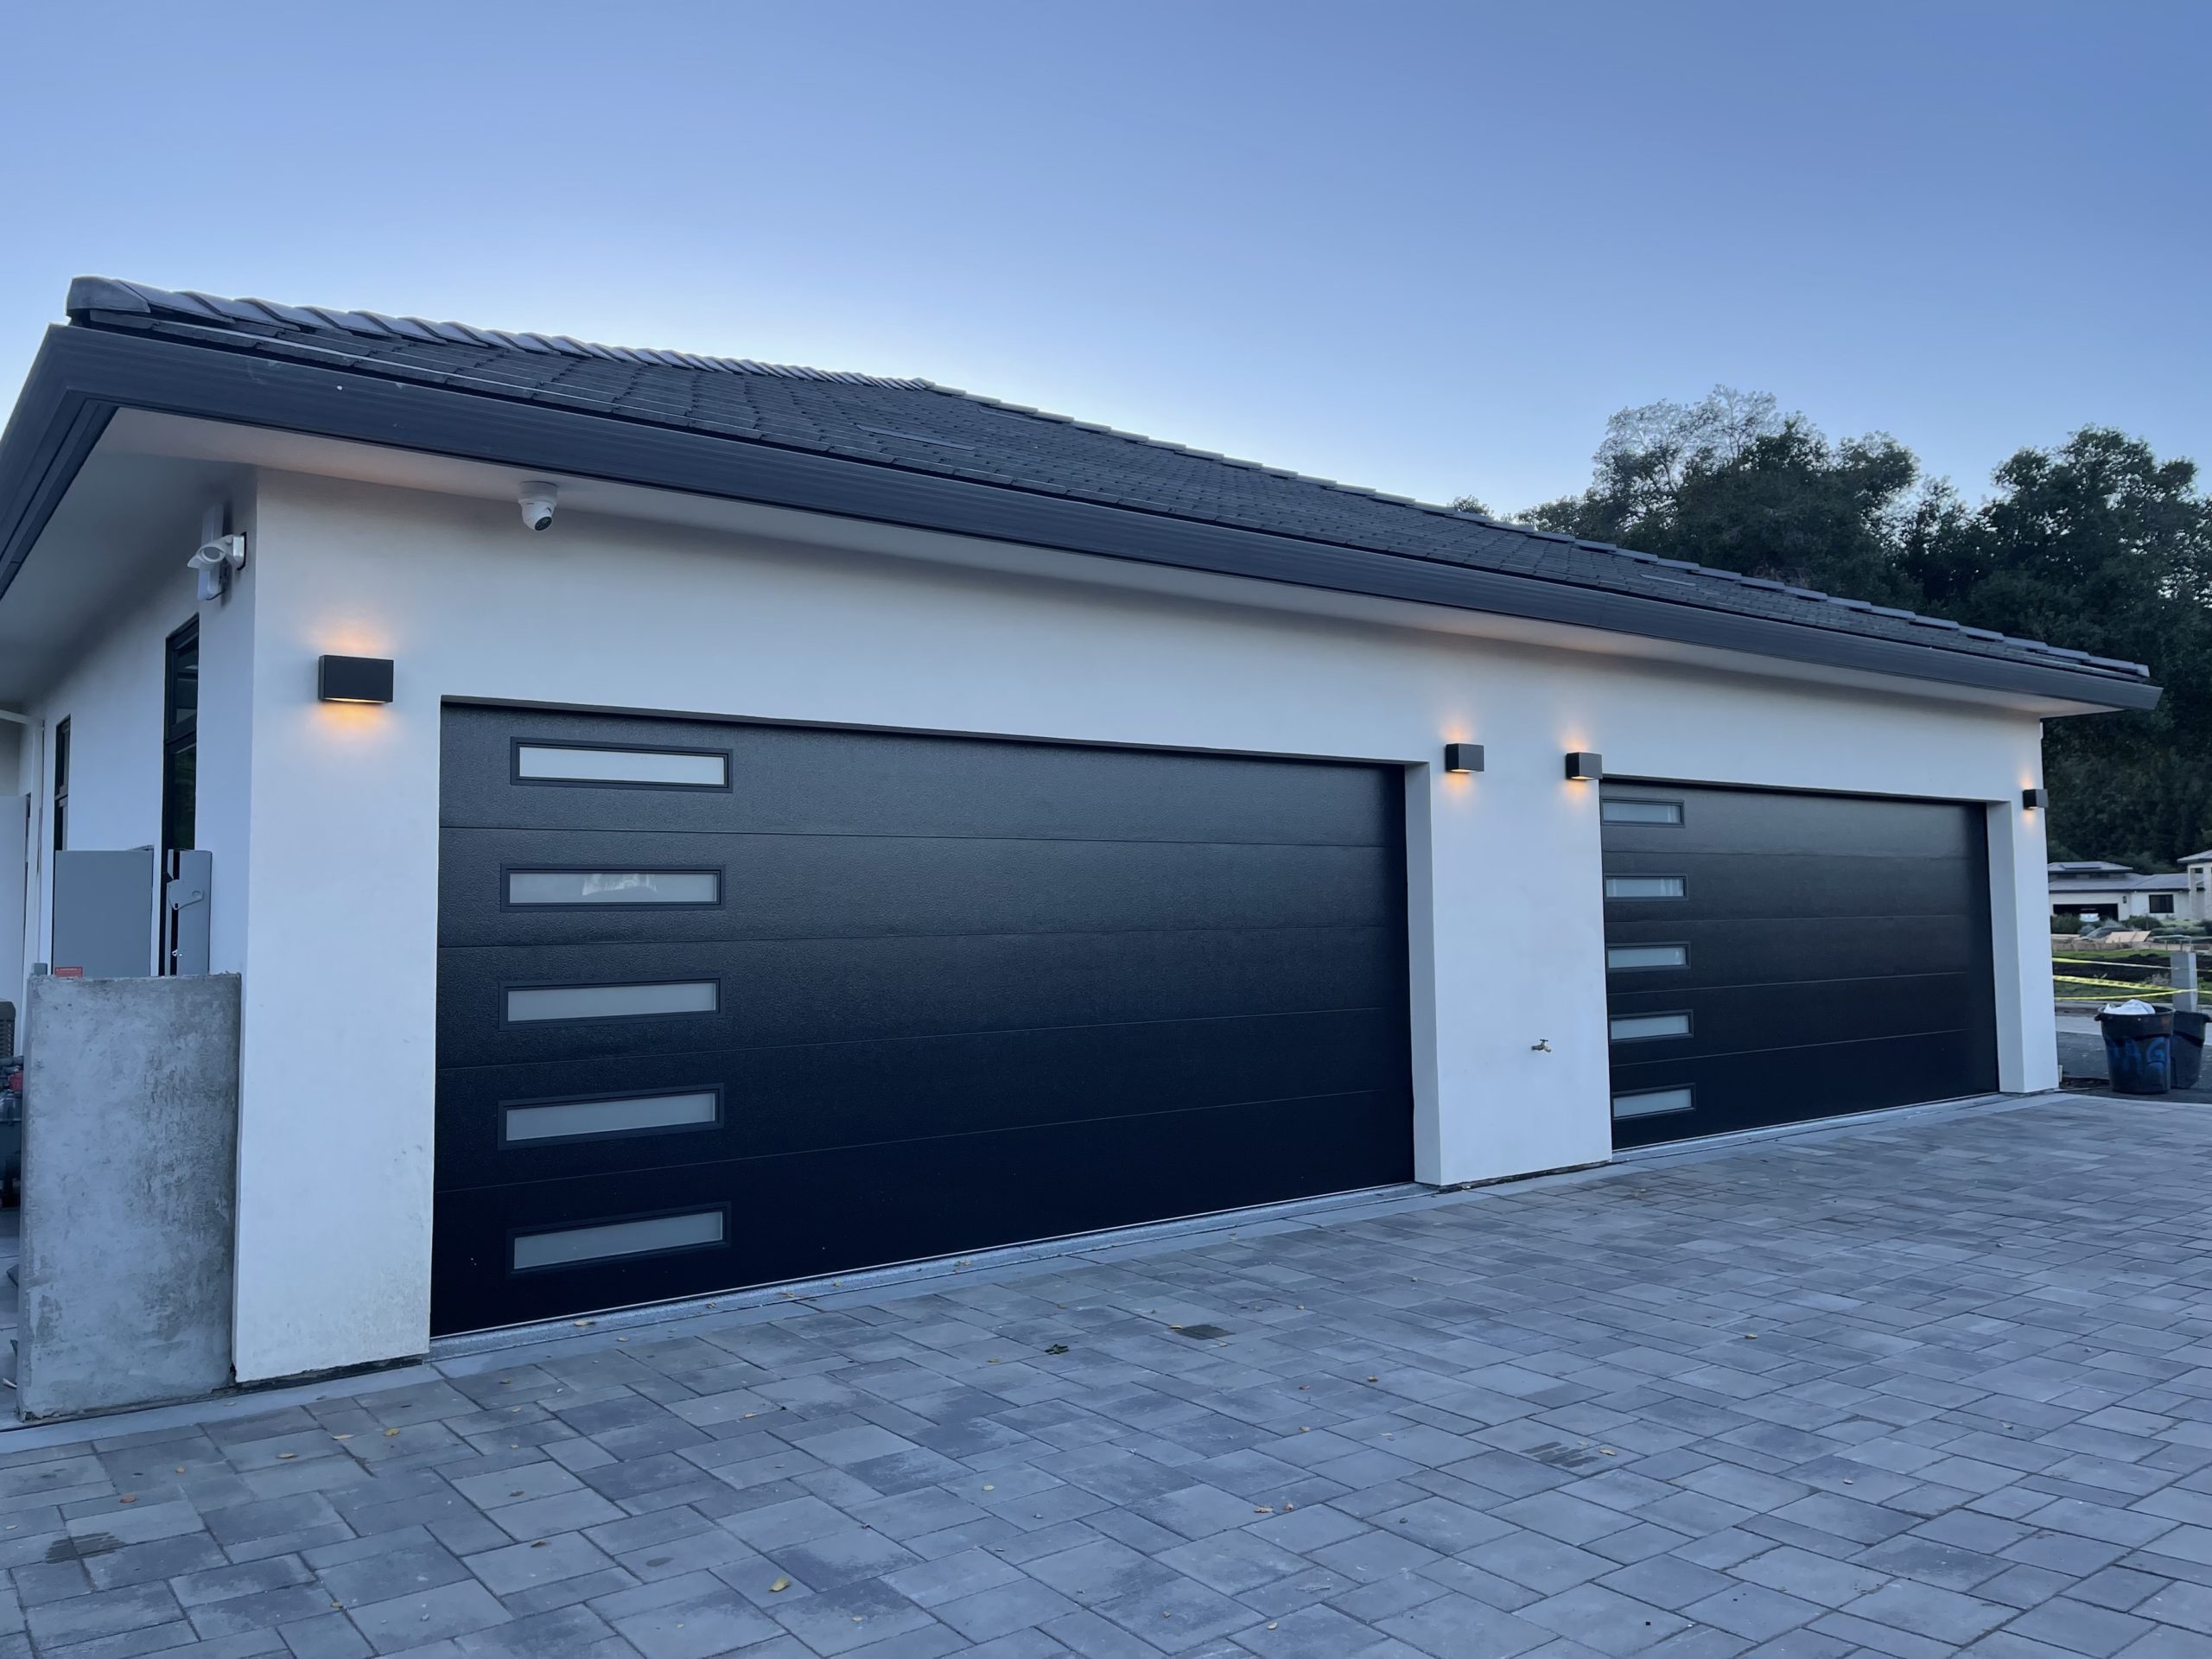 Clopay Garage Door Modern Steel Replacement - Expert Craftsmanship and Quality Products for Homes